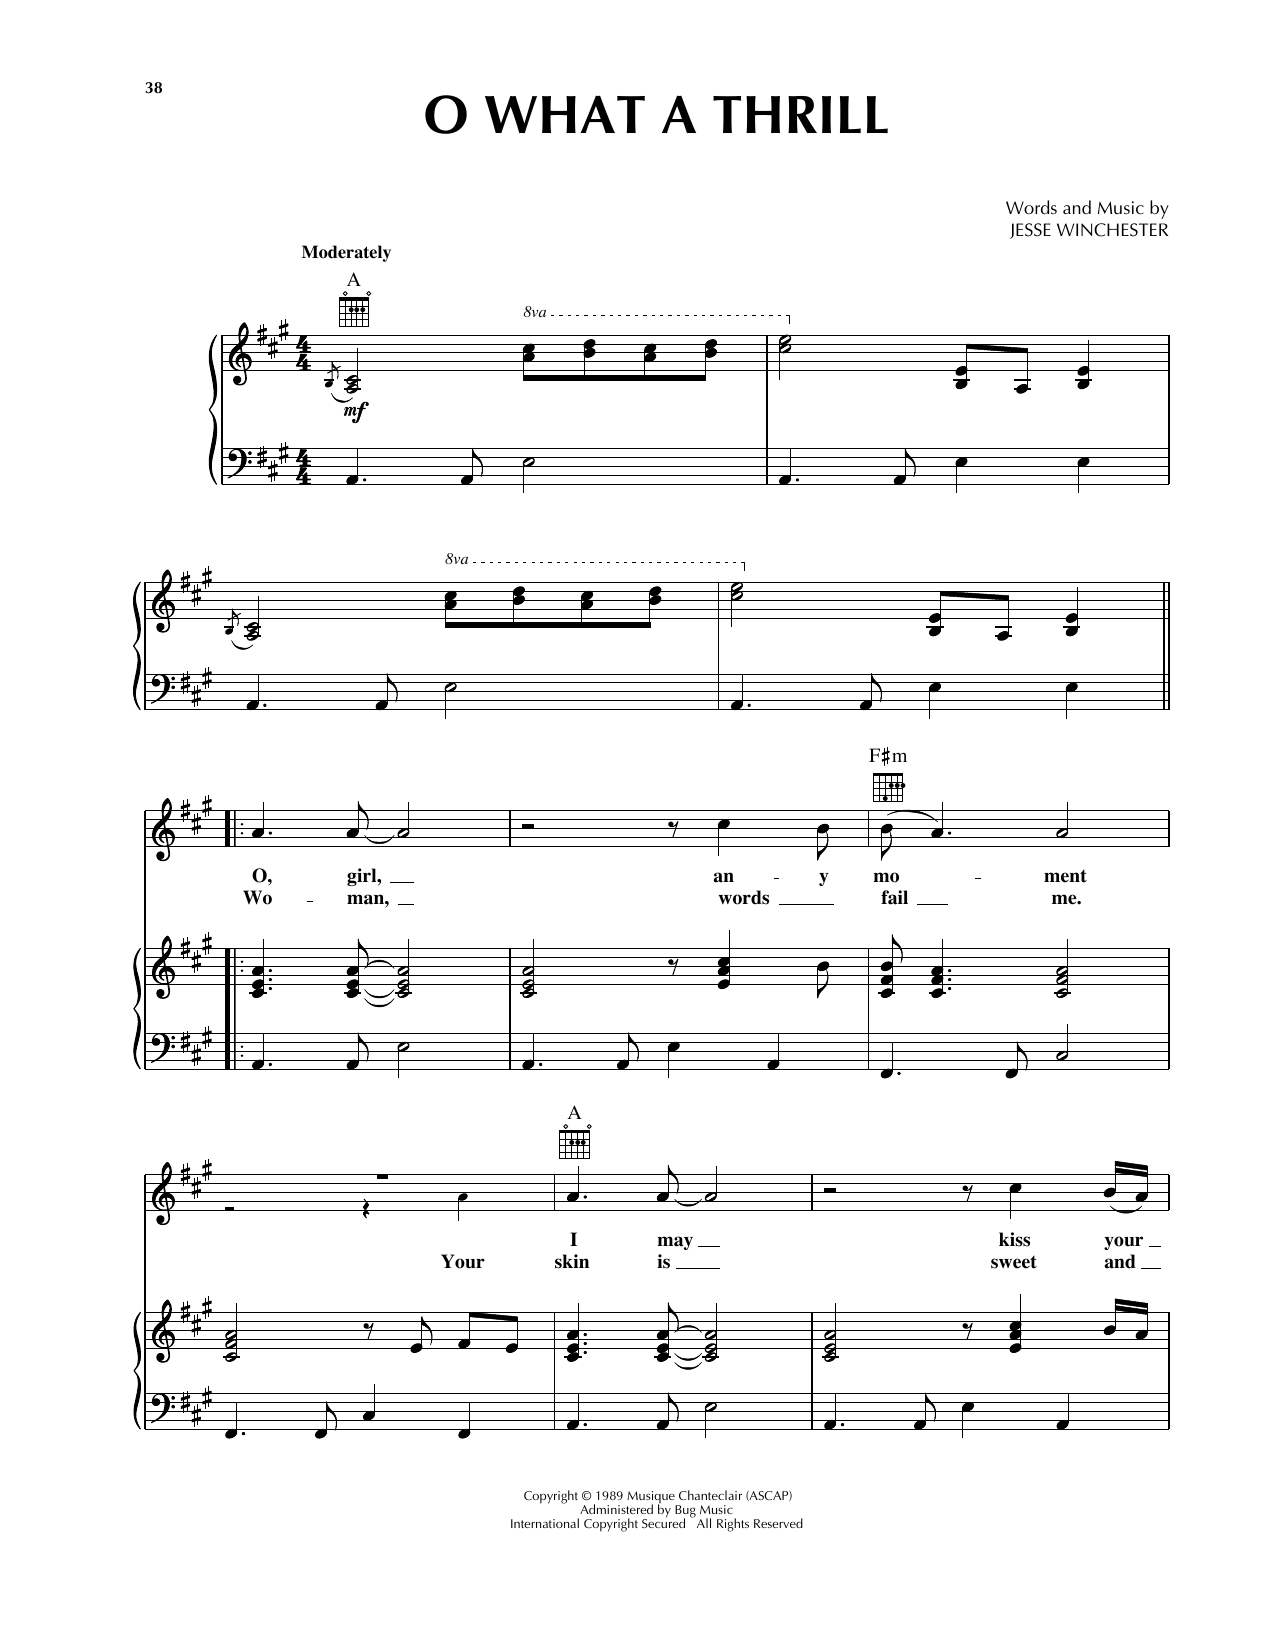 Download The Mavericks O What A Thrill Sheet Music